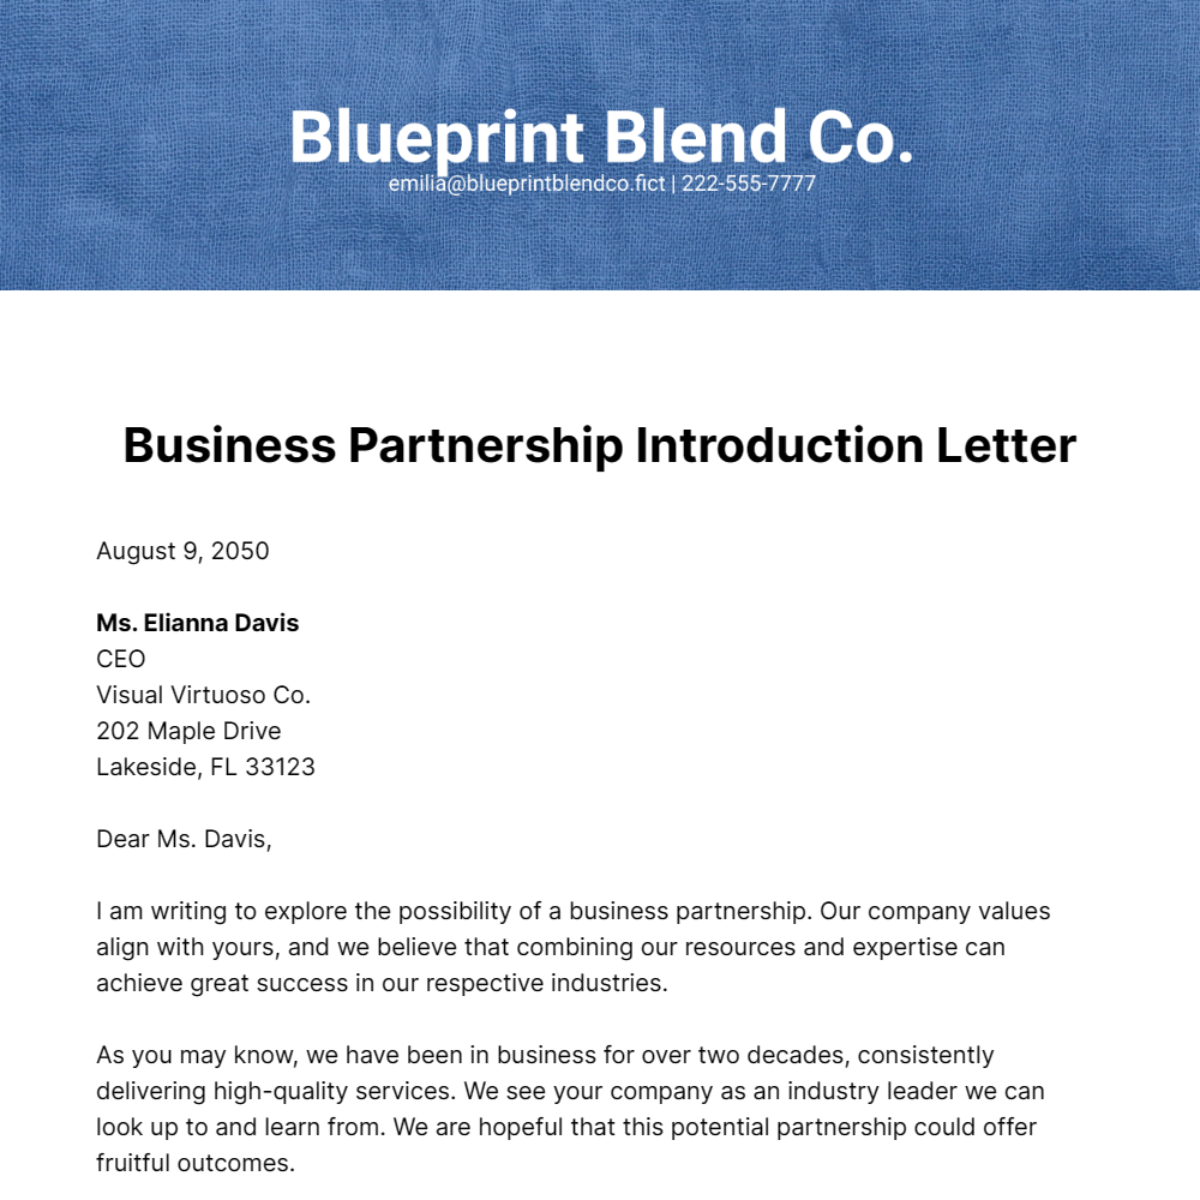 Business Partnership Introduction Letter Template